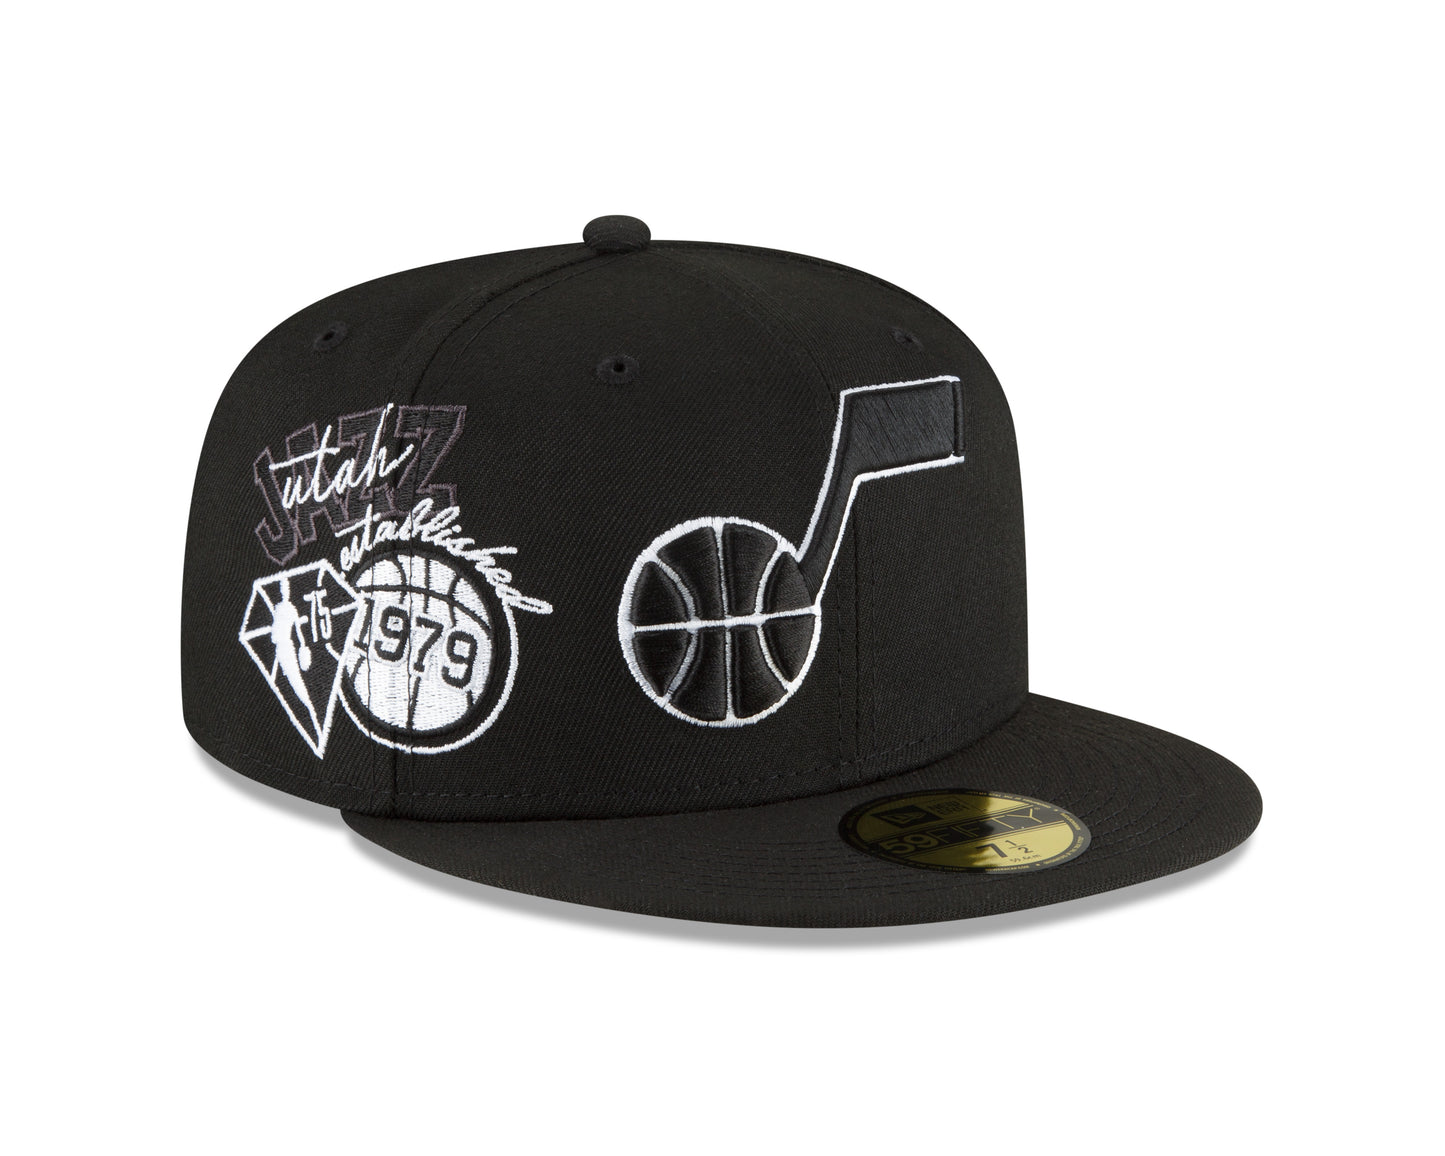 Utah Jazz New Era Black and White Back Half 59fifty Fitted Hat